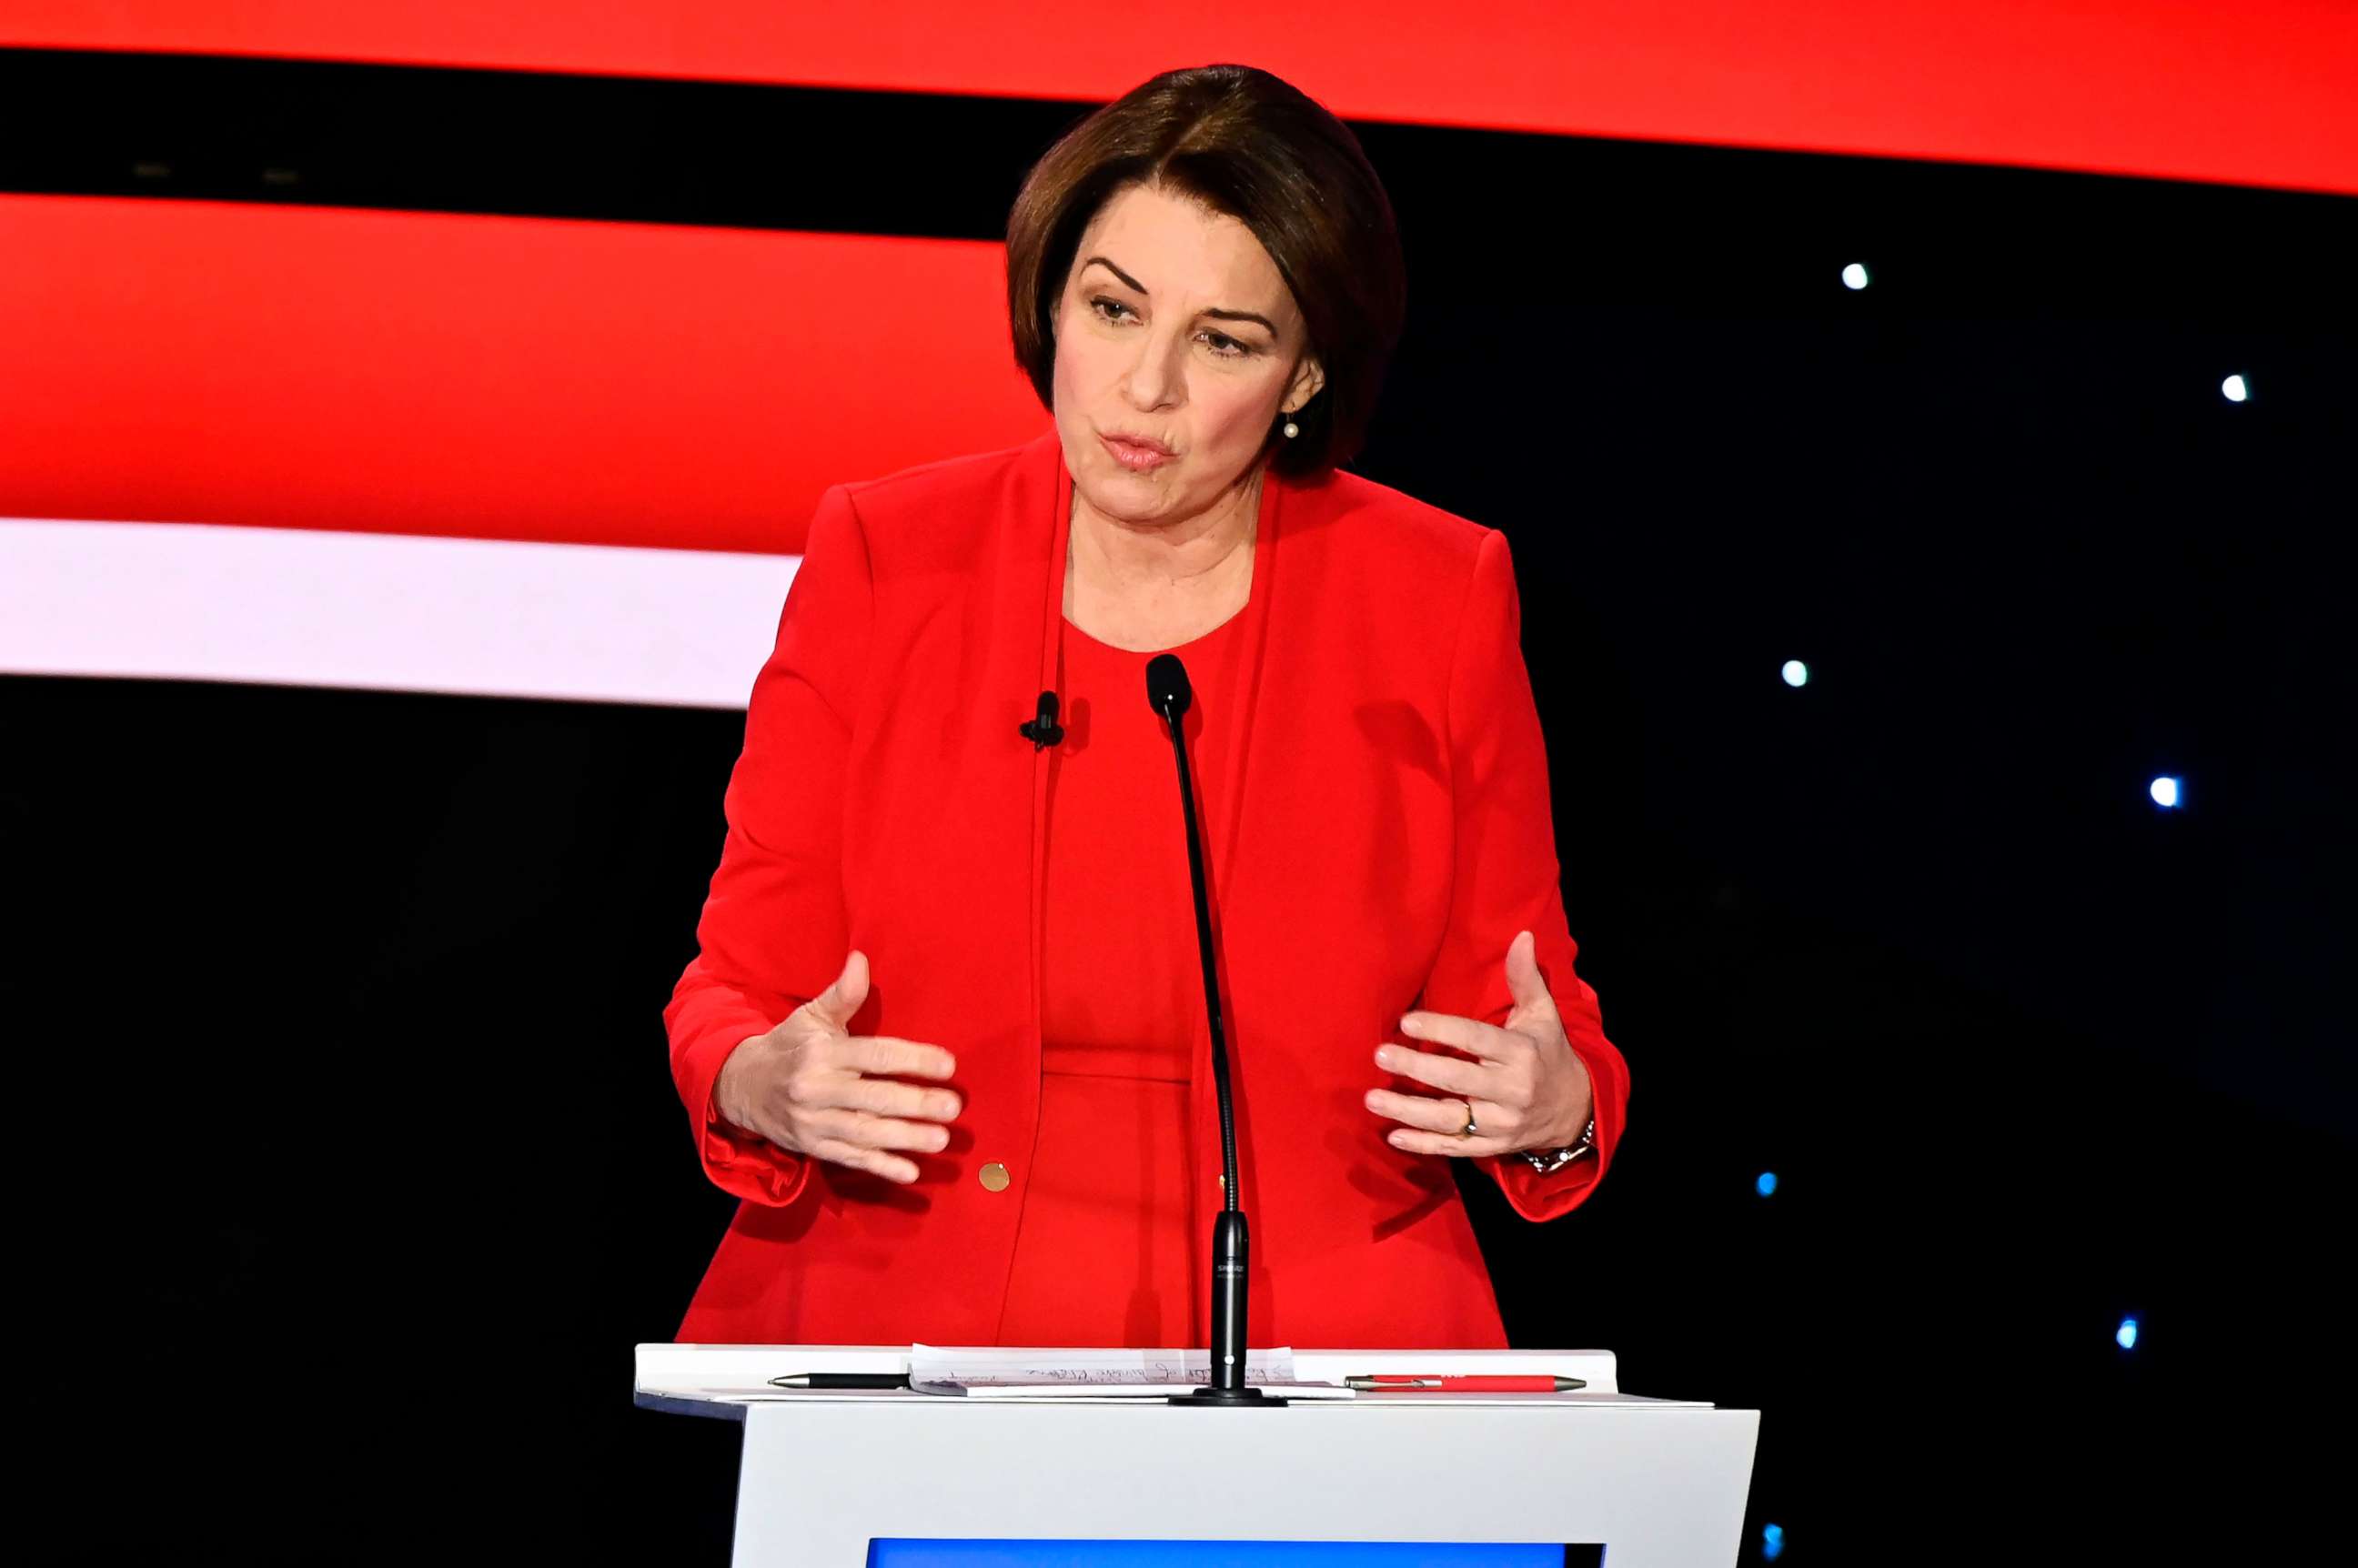 PHOTO: Sen. Amy Klobuchar speaks during the seventh Democratic primary debate of the 2020 presidential campaign season co-hosted by CNN and the Des Moines Register at the Drake University campus in Des Moines, Iowa on Jan. 14, 2020.